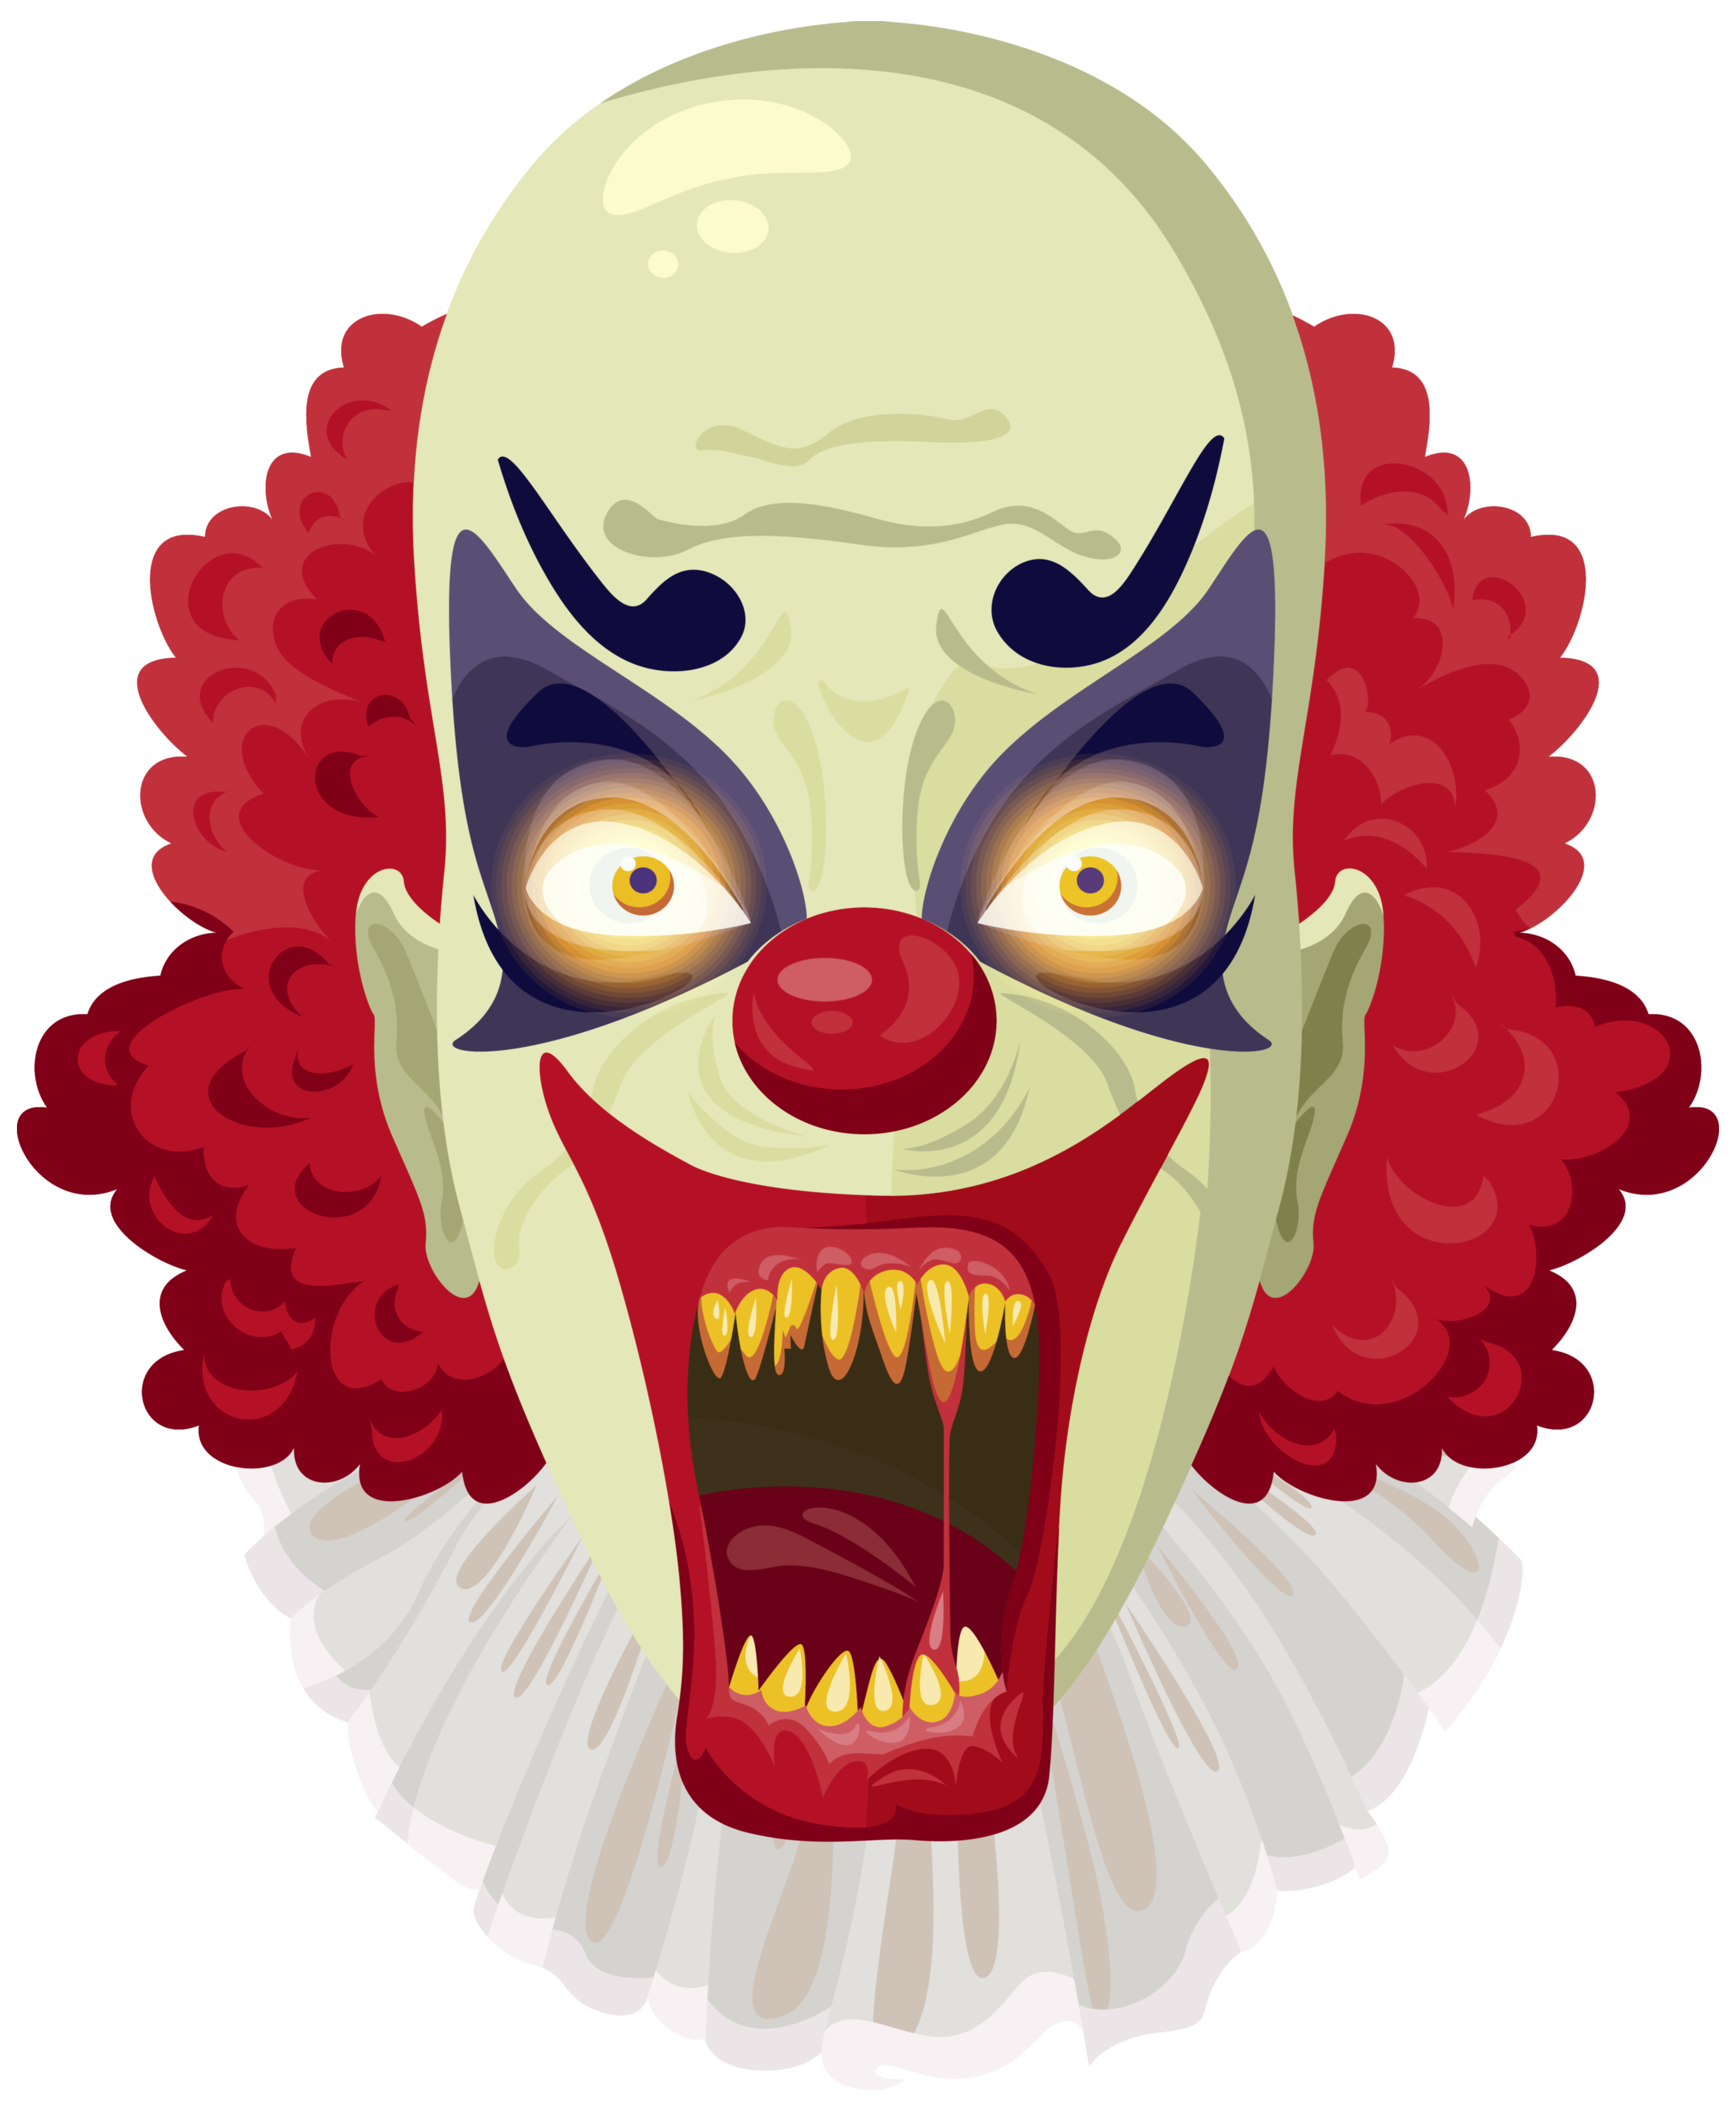 Scary Clown PNG Clipart Image | Gallery Yopriceville ...